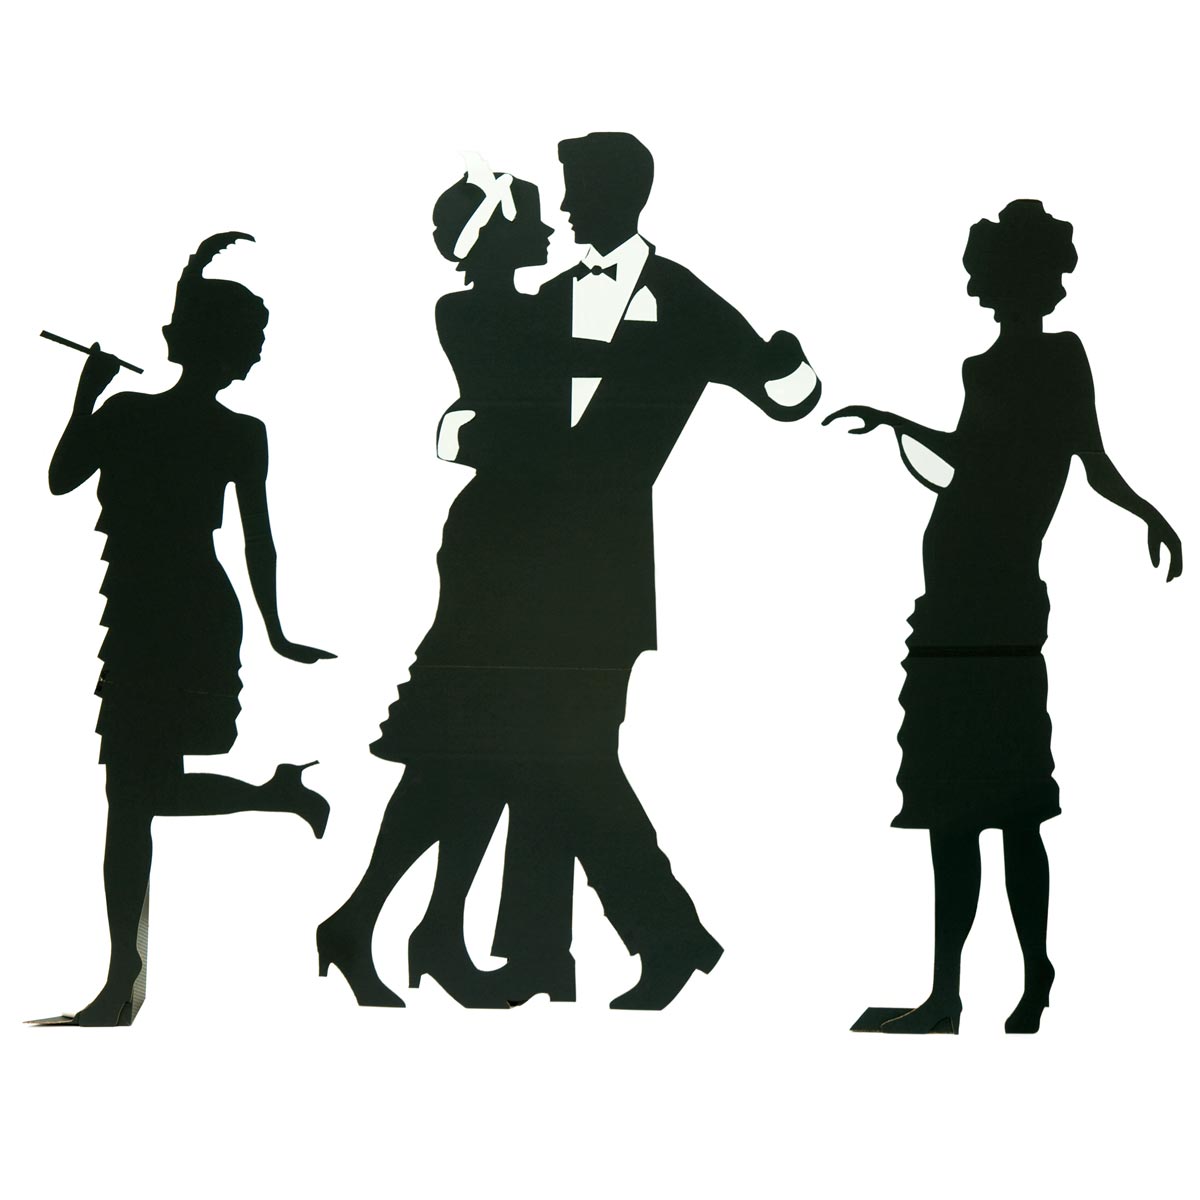 Roaring 20s party clipart 